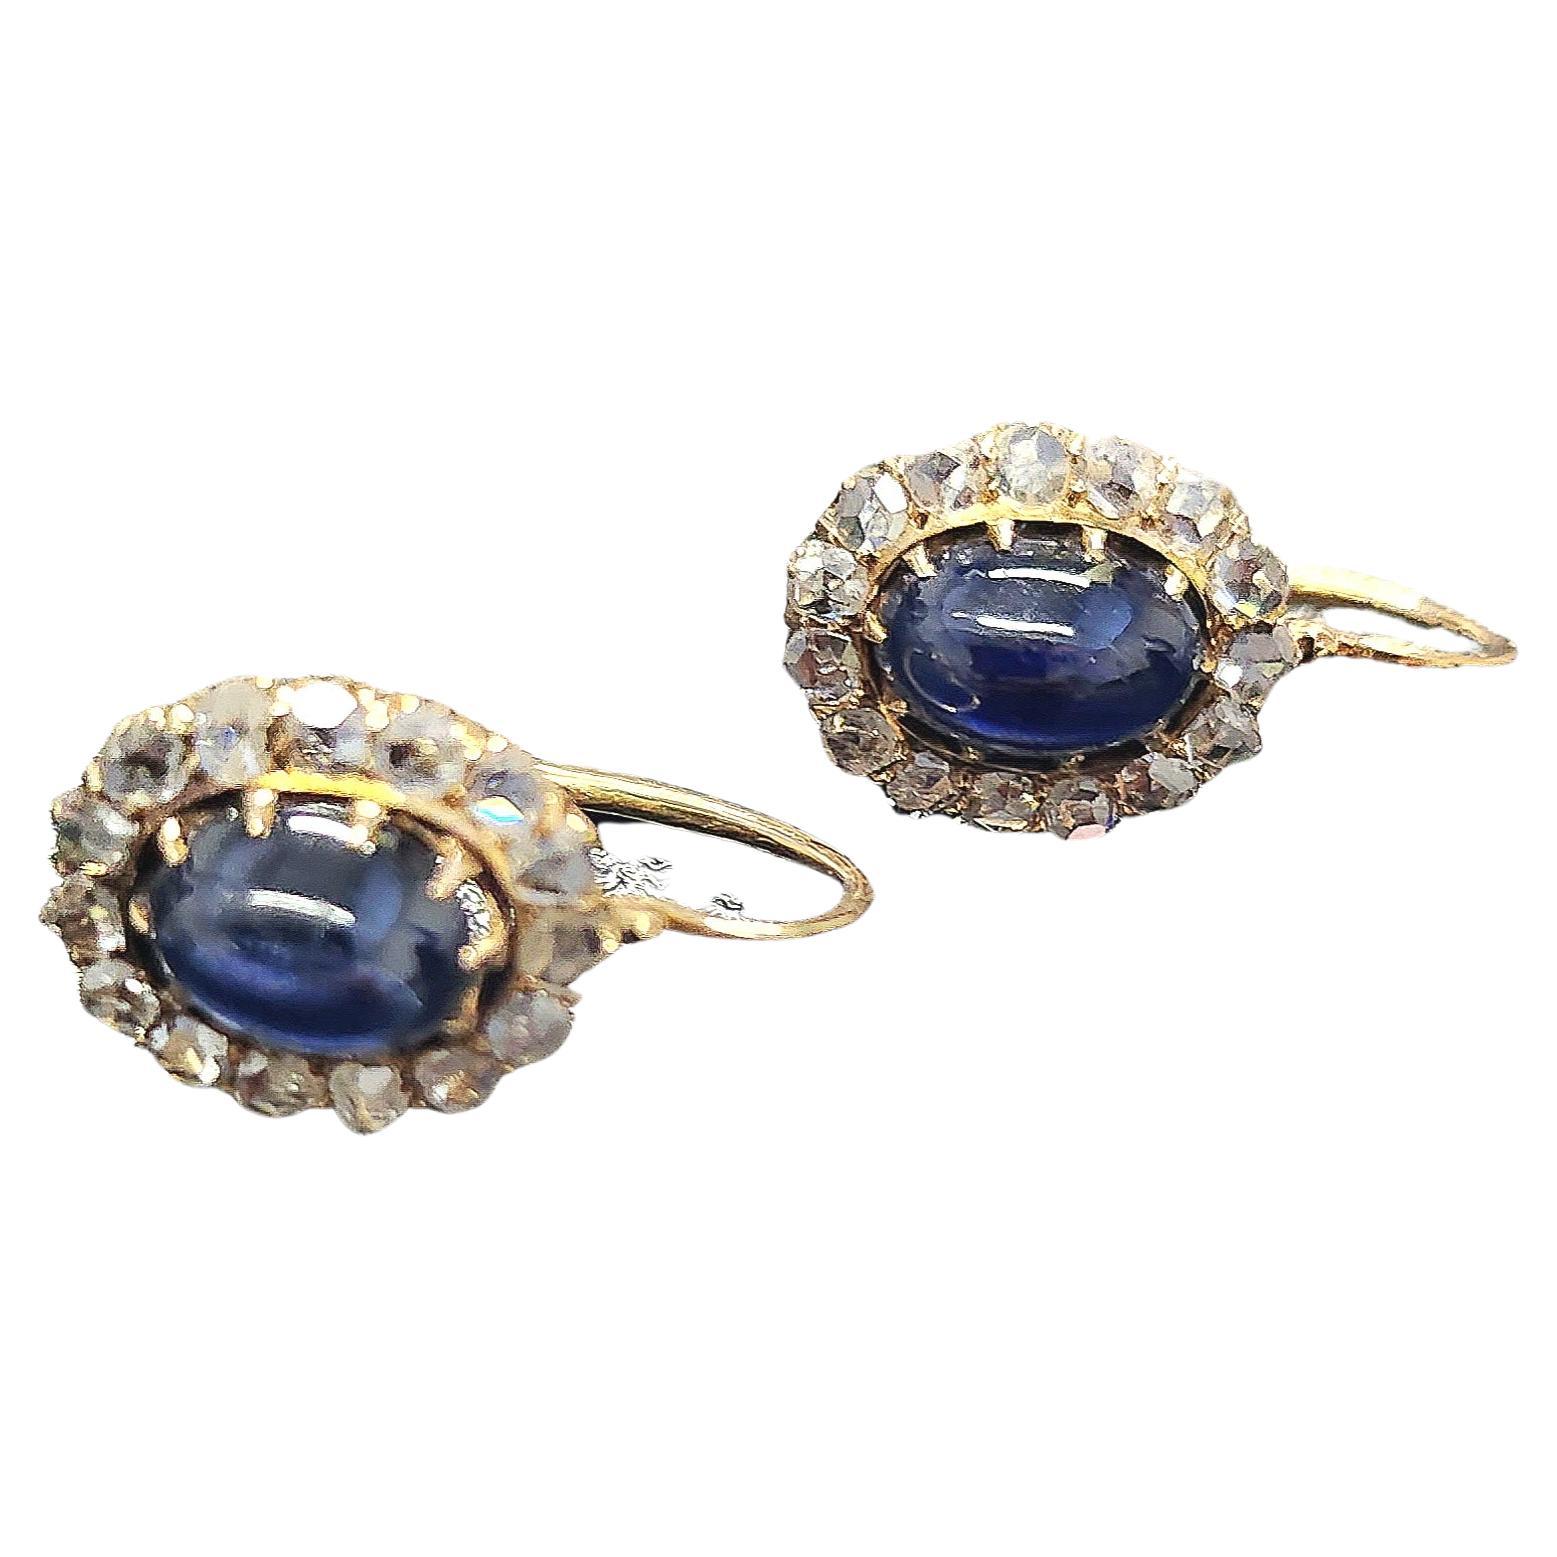 Antique earrings centered with oval cut cabouchon blue sapphire flanked with rose cut diamonds in 14k gold setting hall marked 56 imperial russian gold standard and later with 583 soviet gold control mark 